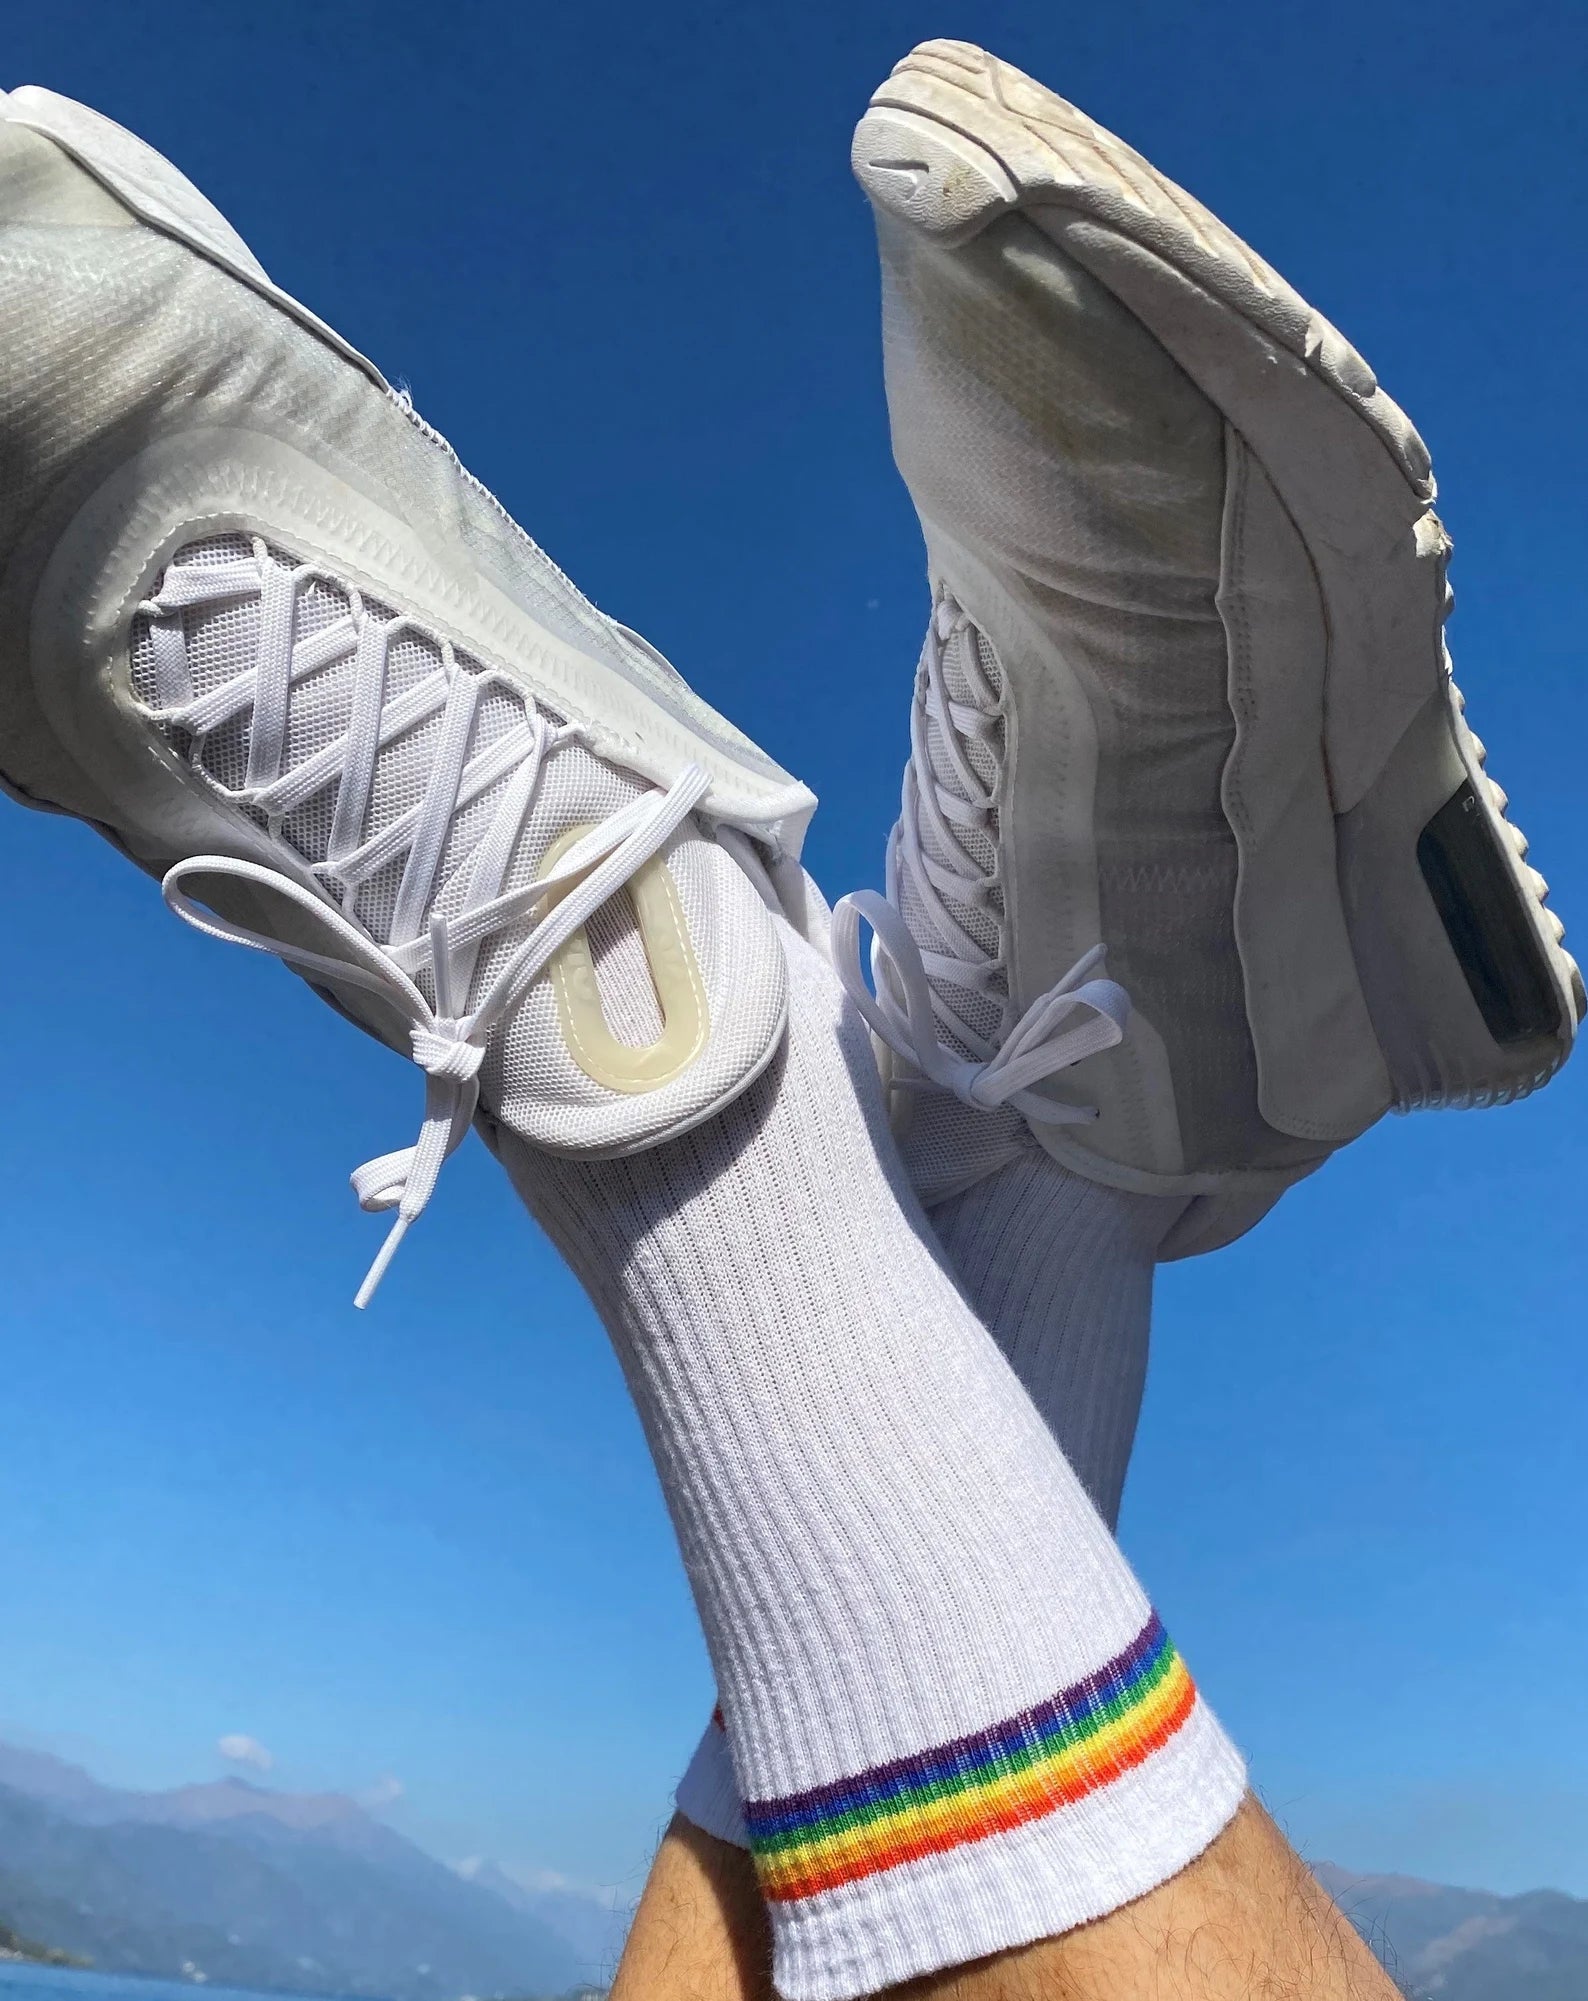 'You Had Me At Hello' Embroidered Pride Socks - Gays+ Store